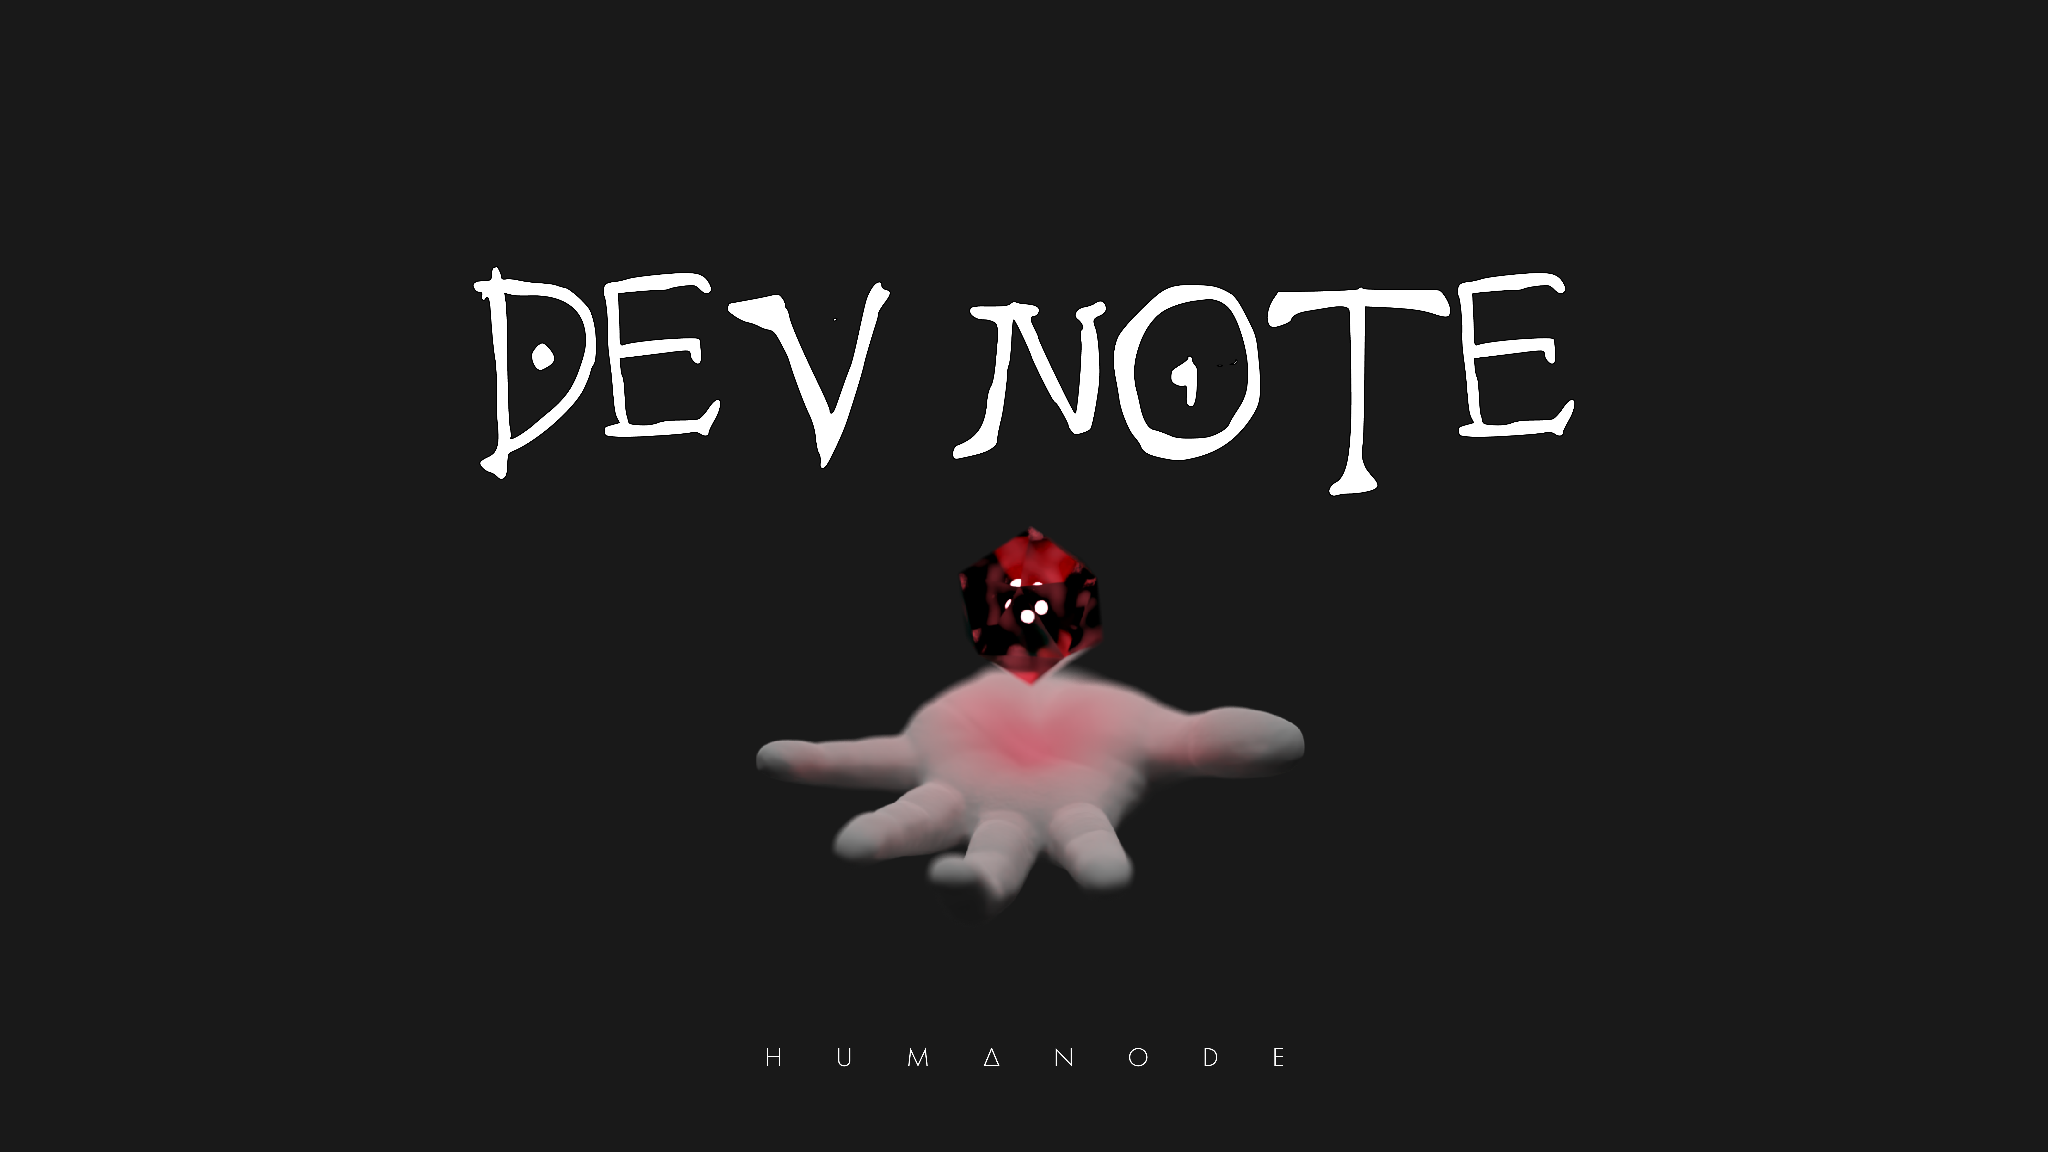 The Developers Note